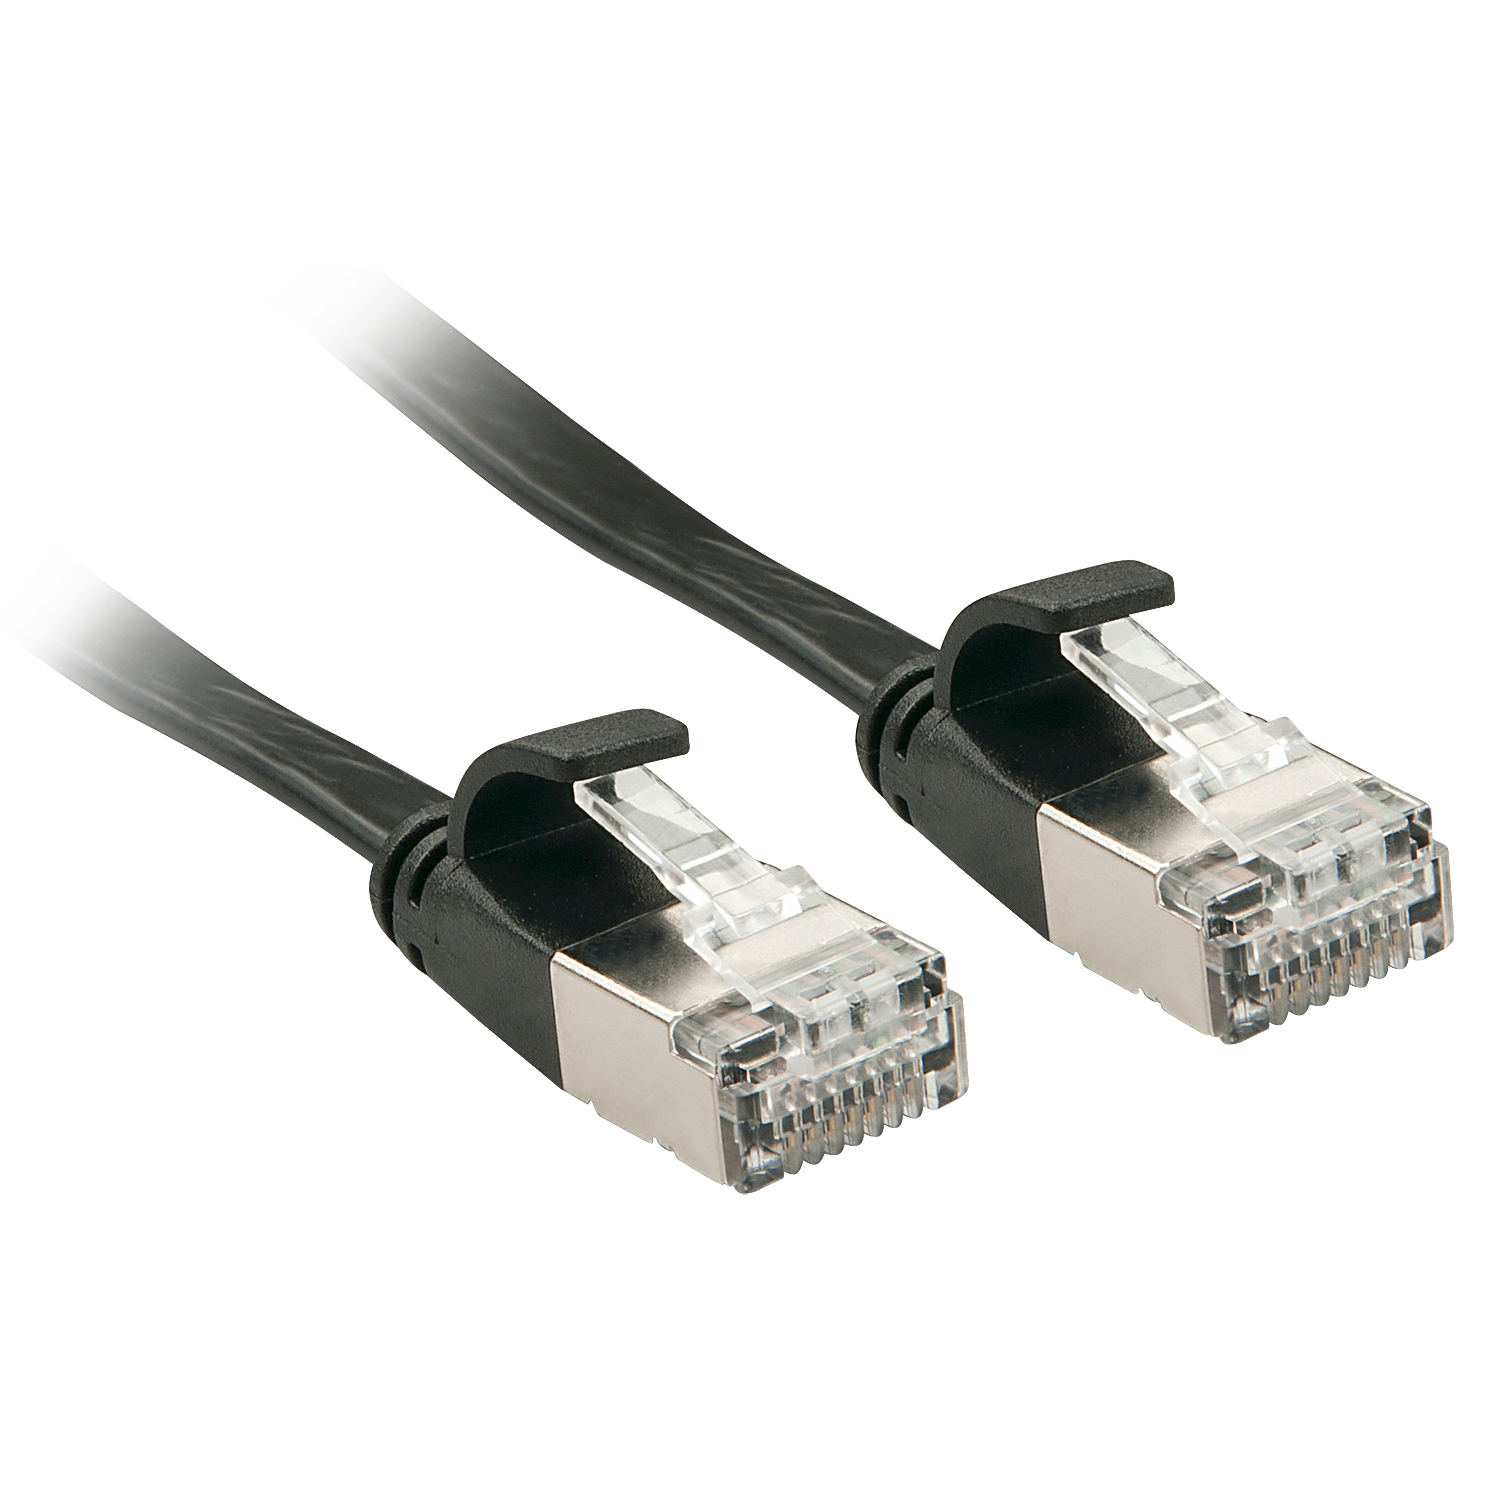 Photos - Cable (video, audio, USB) Lindy 47481 networking cable Black 1 m Cat6a U/FTP  (STP)